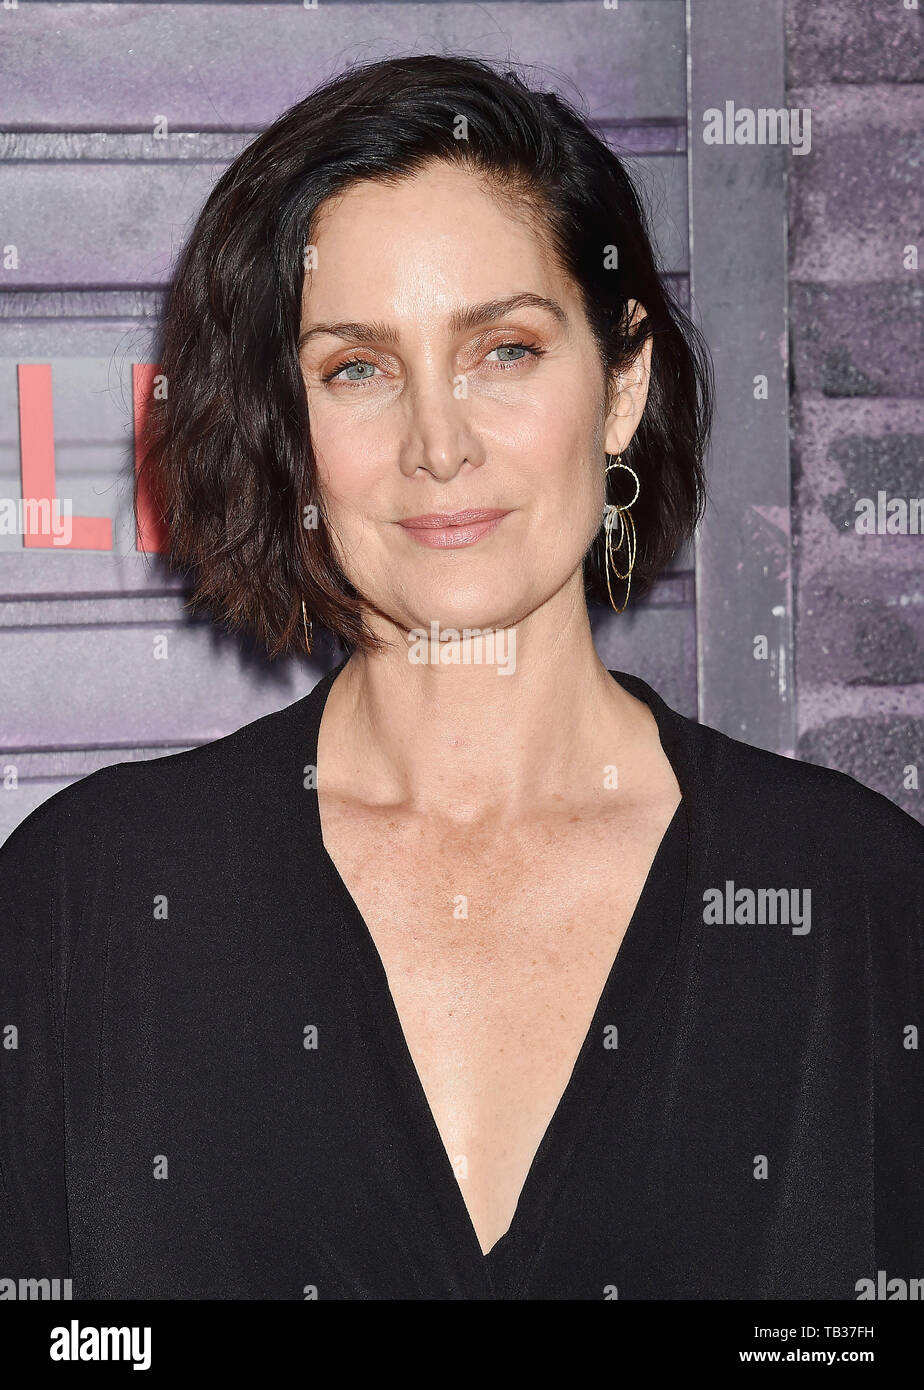 HOLLYWOOD, CA - MAY 28: Carrie-Anne Moss attends a Special Screening Of Netflix's 'Jessica Jones' Season 3 at ArcLight Hollywood on May 28, 2019 in Hollywood, California. © Joe Sutter, PacificCoastNews. Los Angeles Office (PCN): +1 310.822.0419 UK Office (Photoshot): +44 (0) 20 7421 6000 sales@pacificcoastnews.com FEE MUST BE AGREED PRIOR TO USAGE Stock Photo